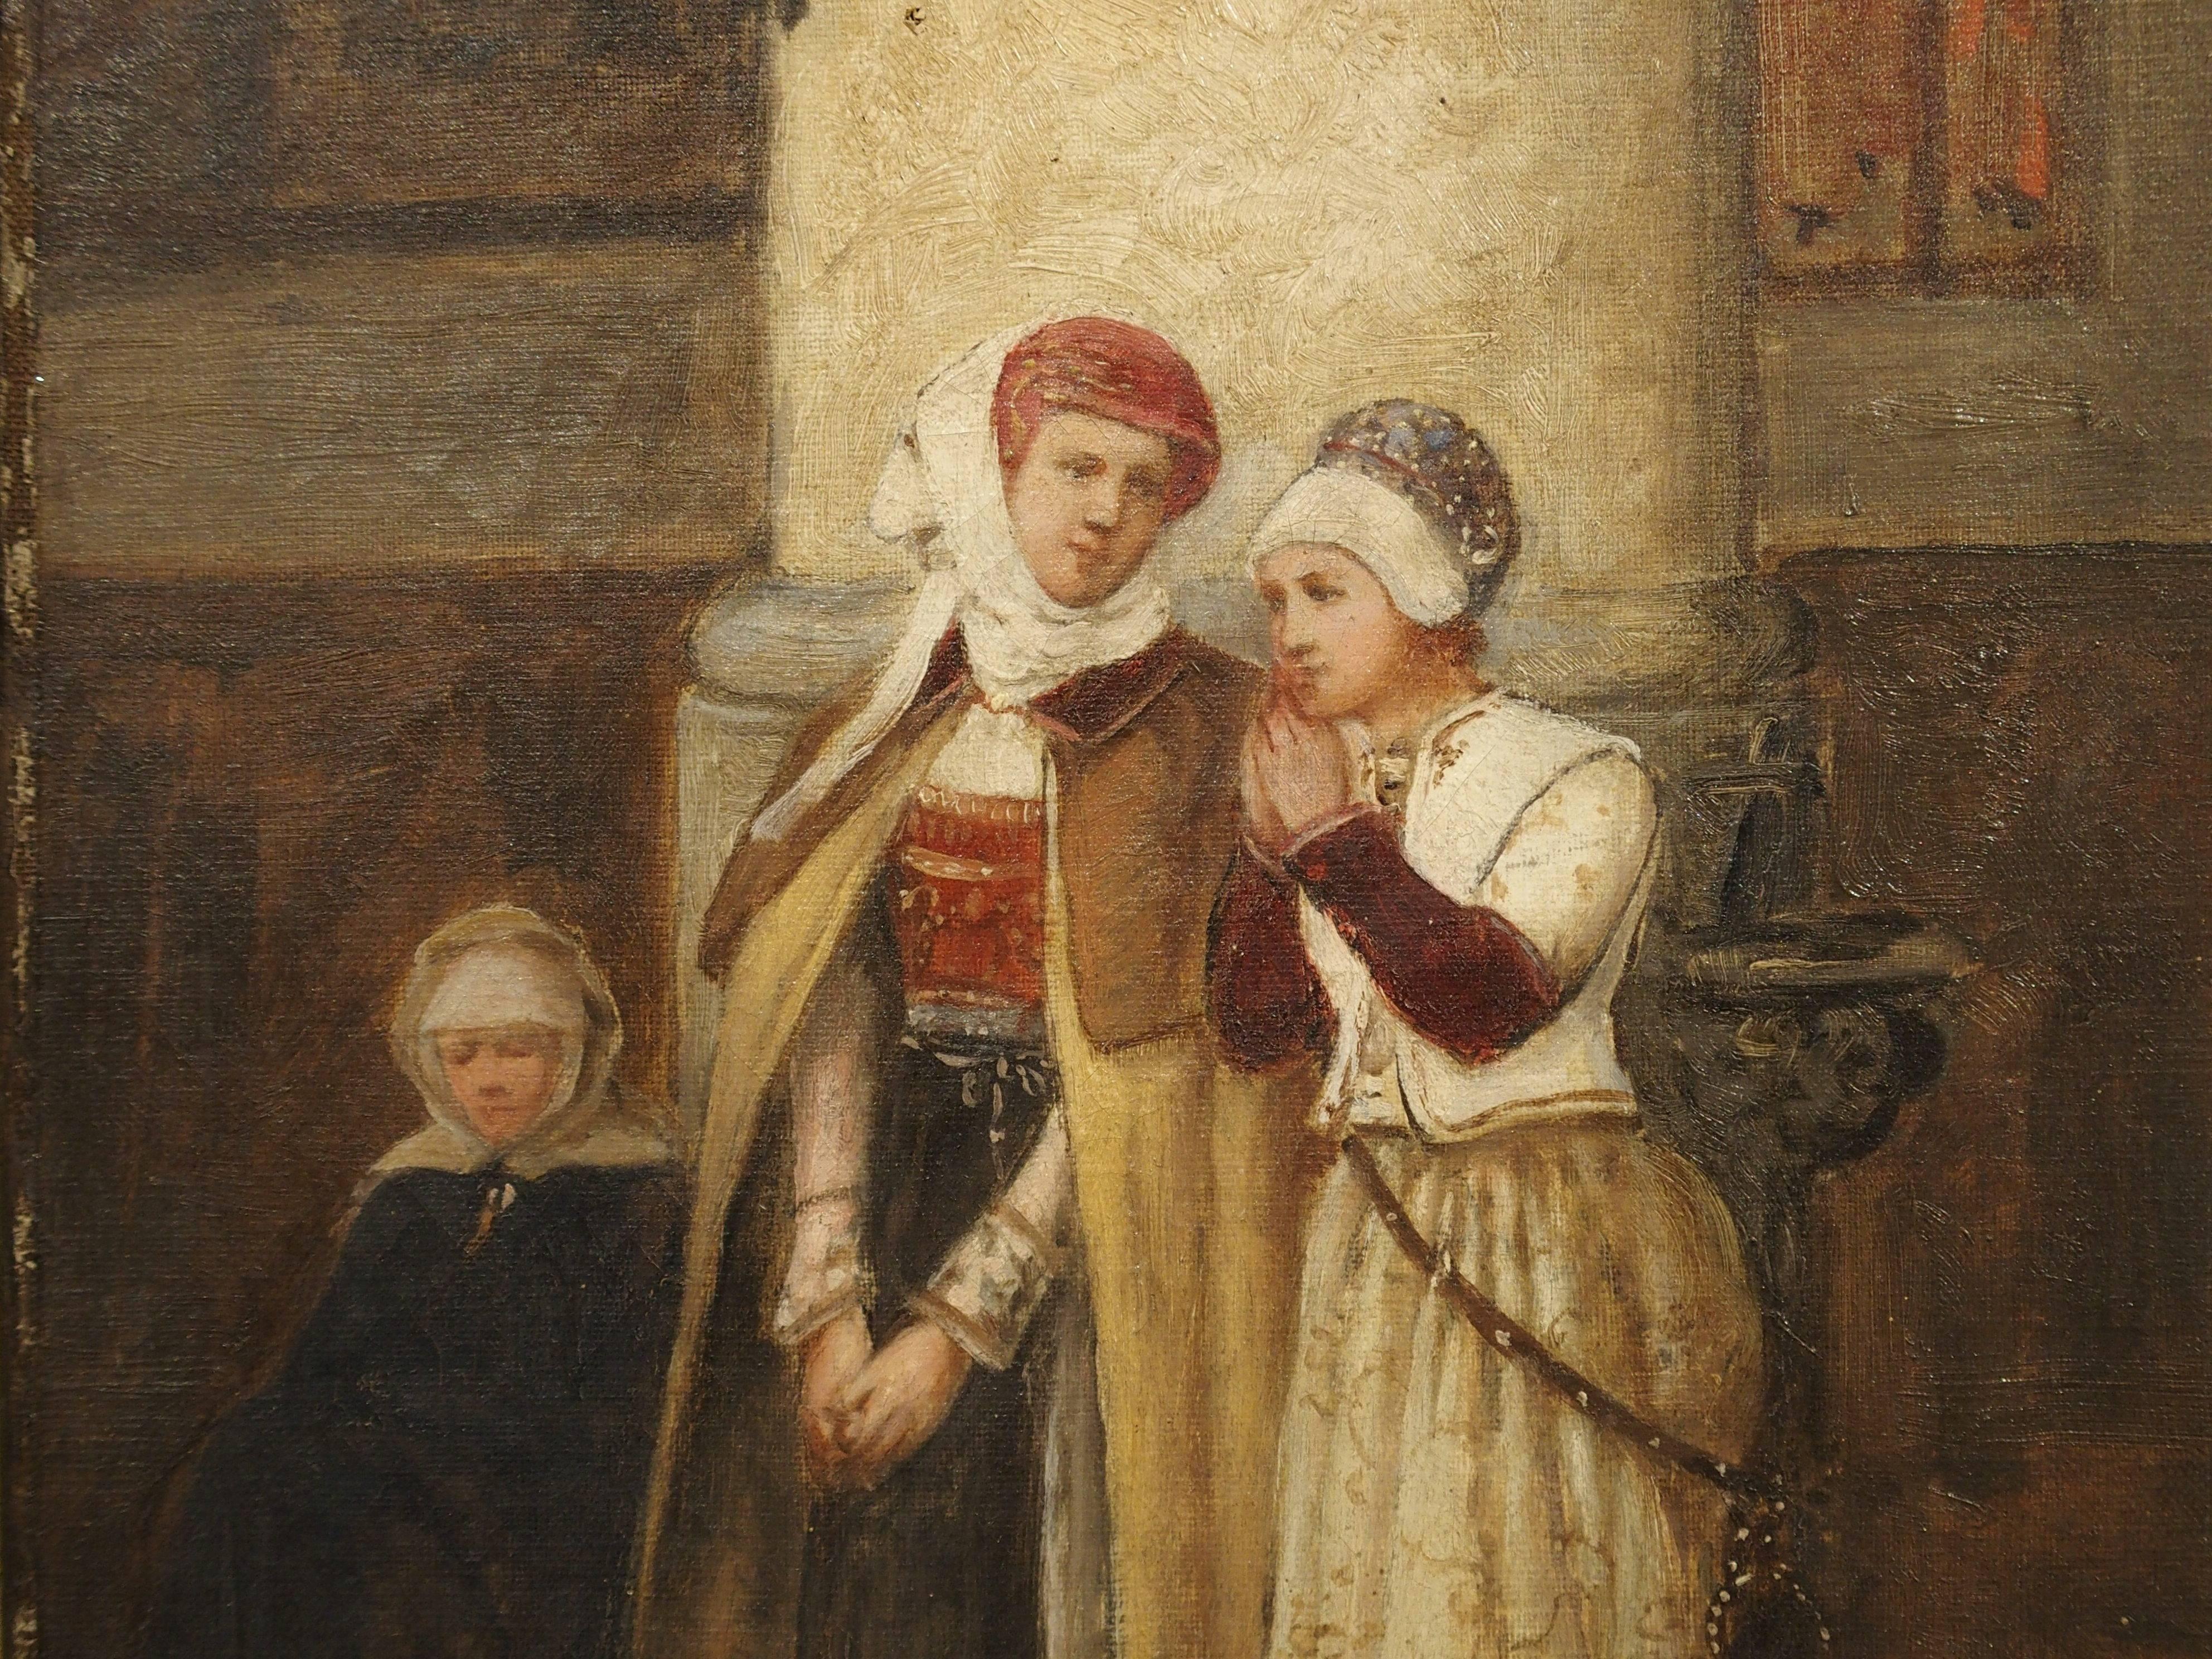 Oil on canvas.

This pensive antique French painting depicting three women in the interior of a church is by Du Mont. A Nun is seated in prayer while the other two standing women are in silence, with one in prayer. It has been framed in a matte